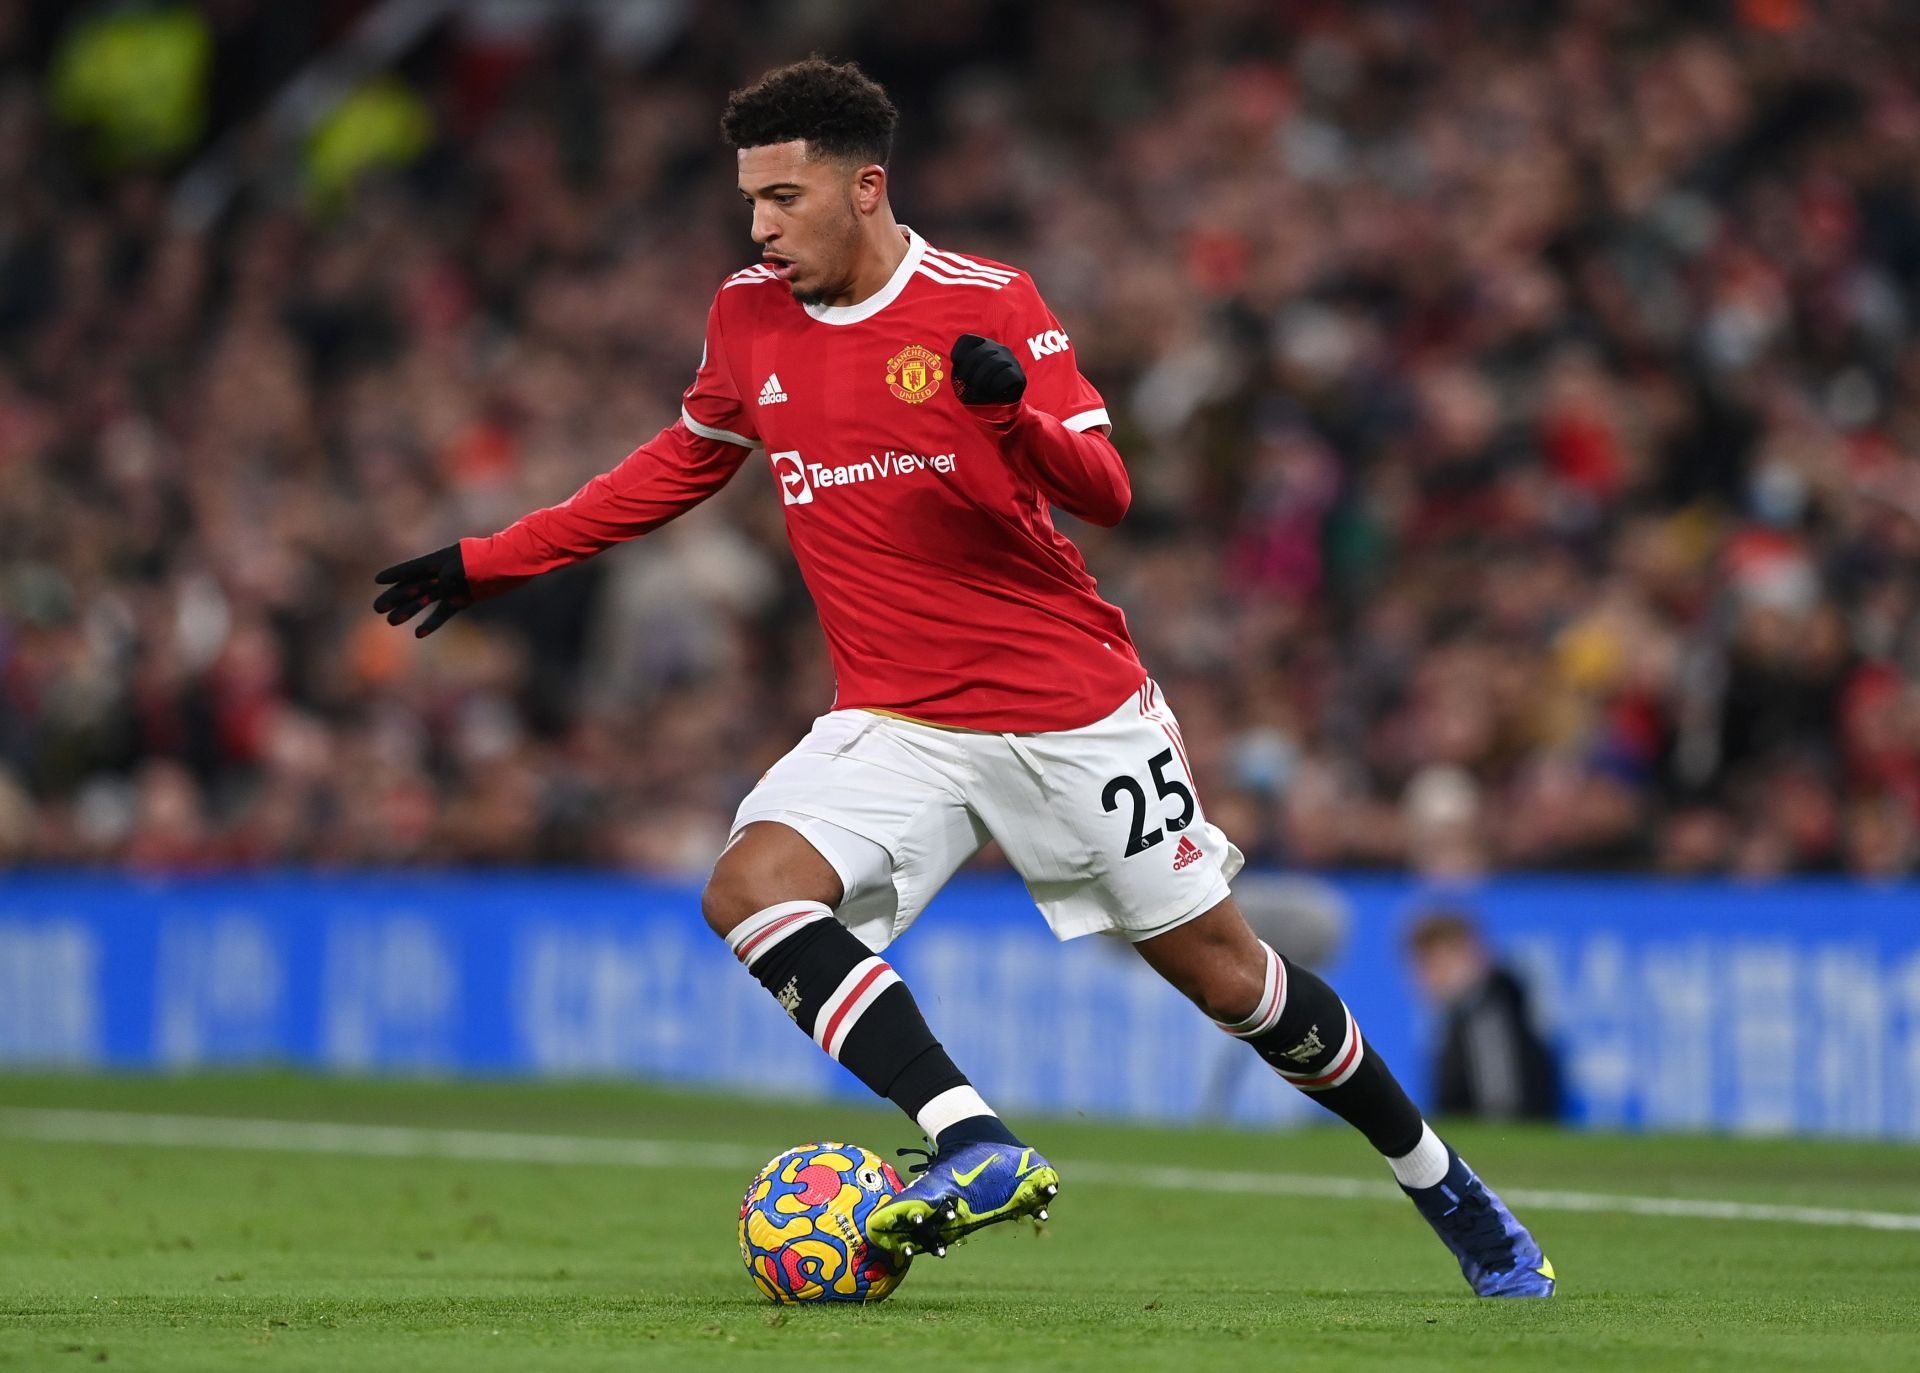 Manchester United star Jadon Sancho has struggled to acclimatize to the Premier League.